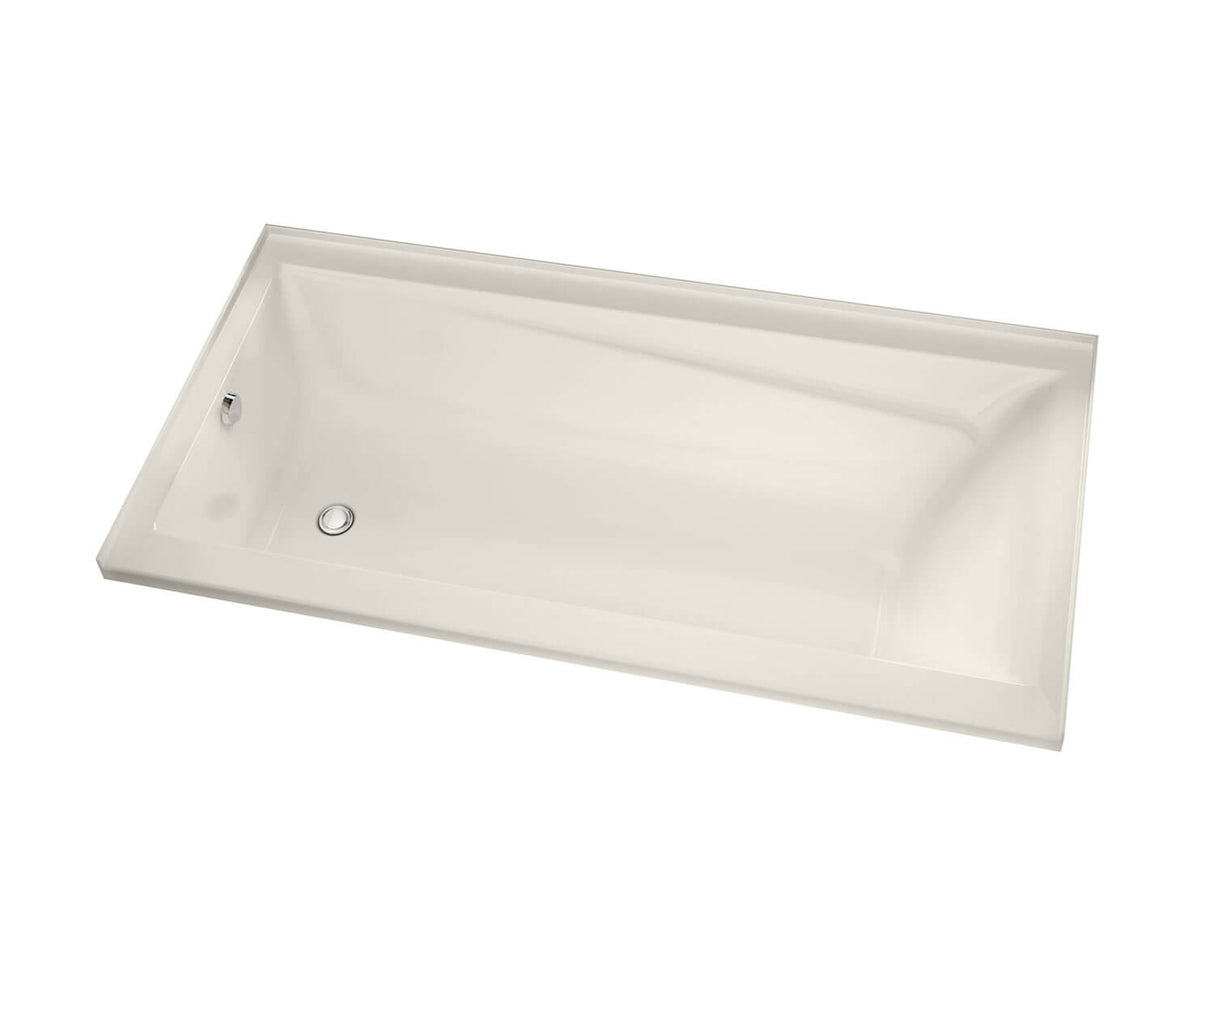 MAAX 106182-L-003-007 Exhibit 7236 IF Acrylic Alcove Left-Hand Drain Whirlpool Bathtub in Biscuit